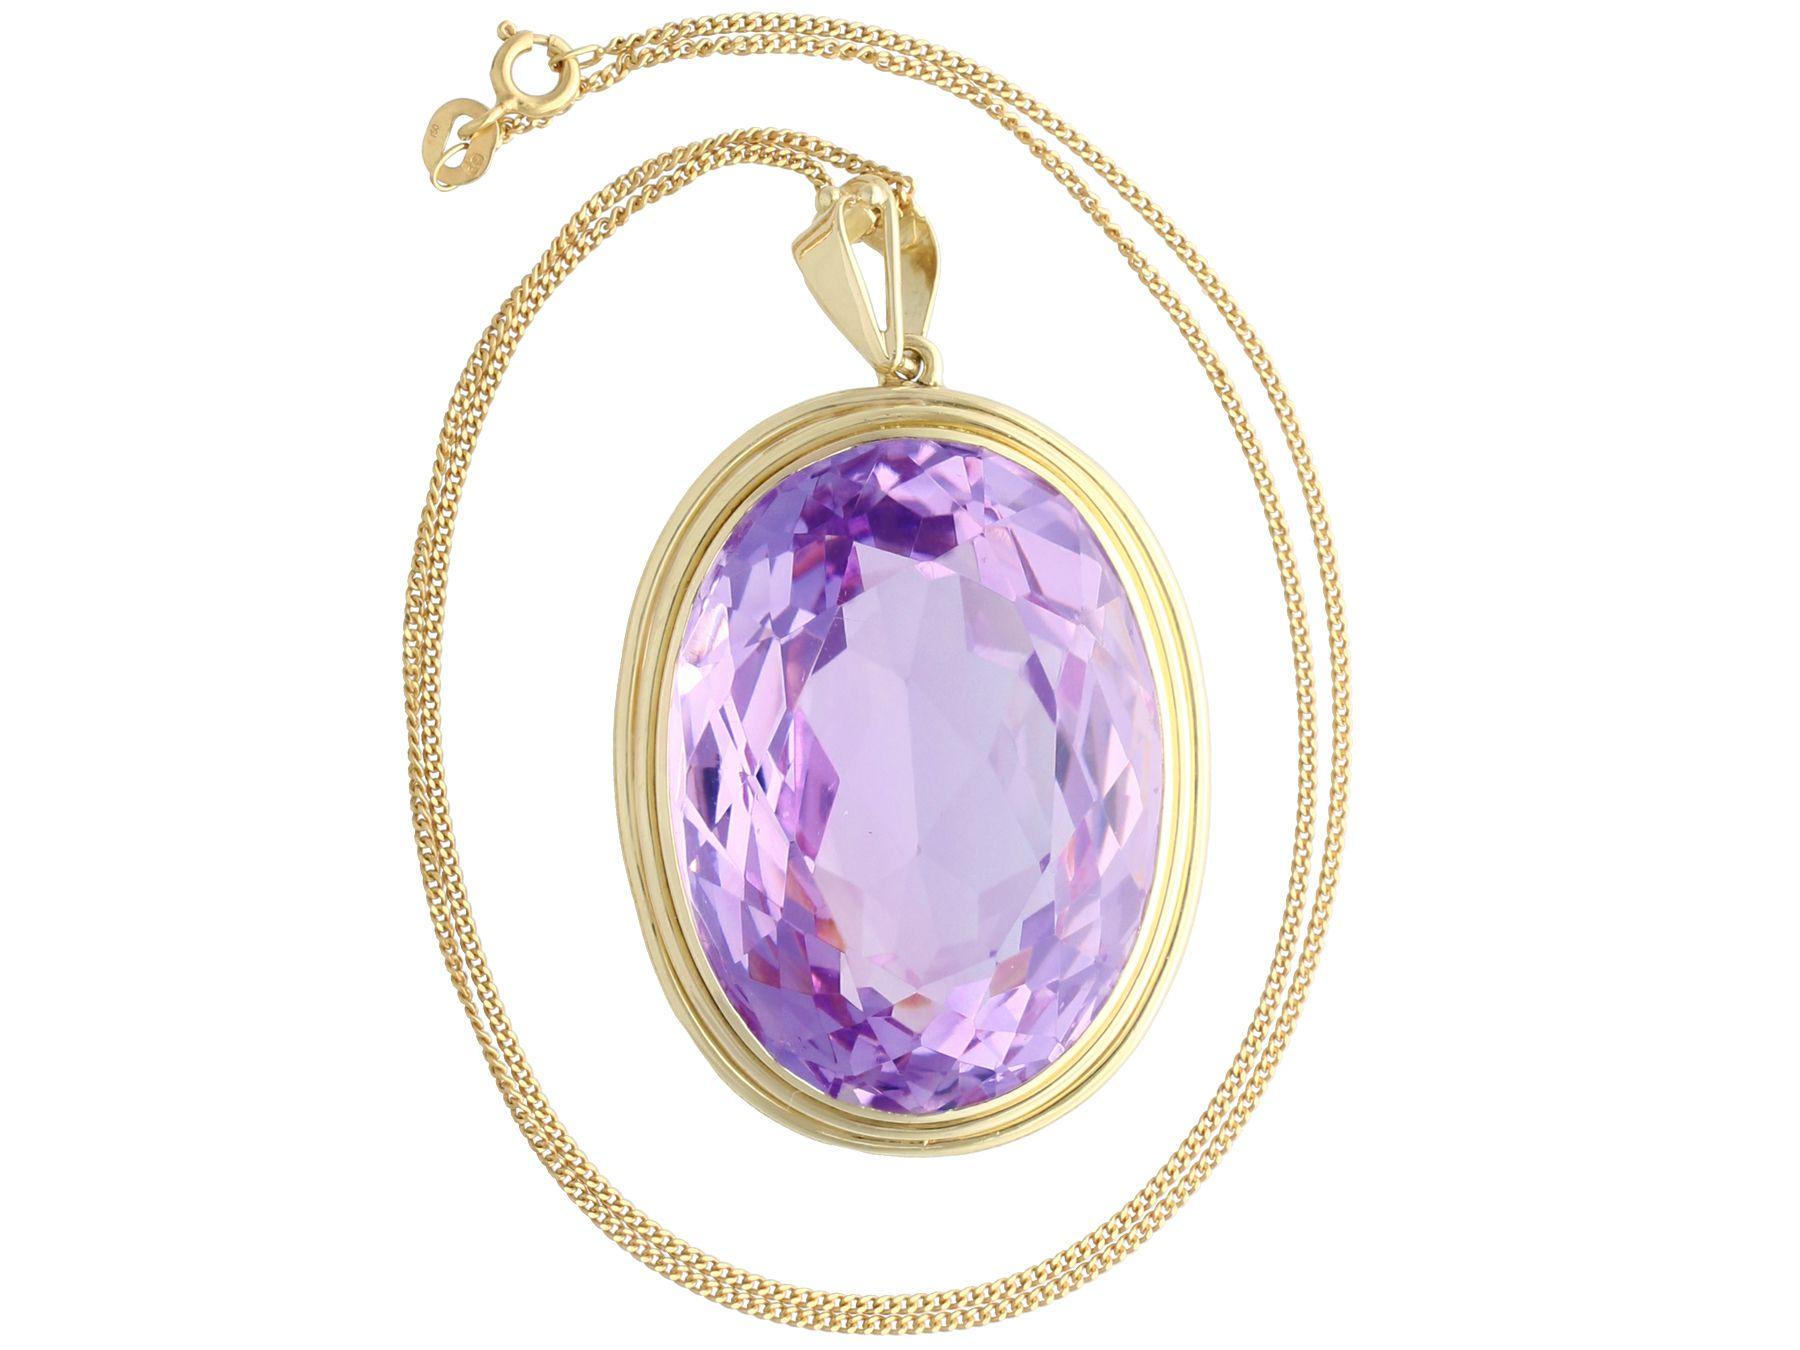 A stunning, fine and impressive, large vintage 104.48 carat amethyst and 14 carat yellow gold pendant; part of our diverse gemstone jewellery and estate jewelry collections.

This fine and impressive vintage amethyst pendant has been crafted in 14